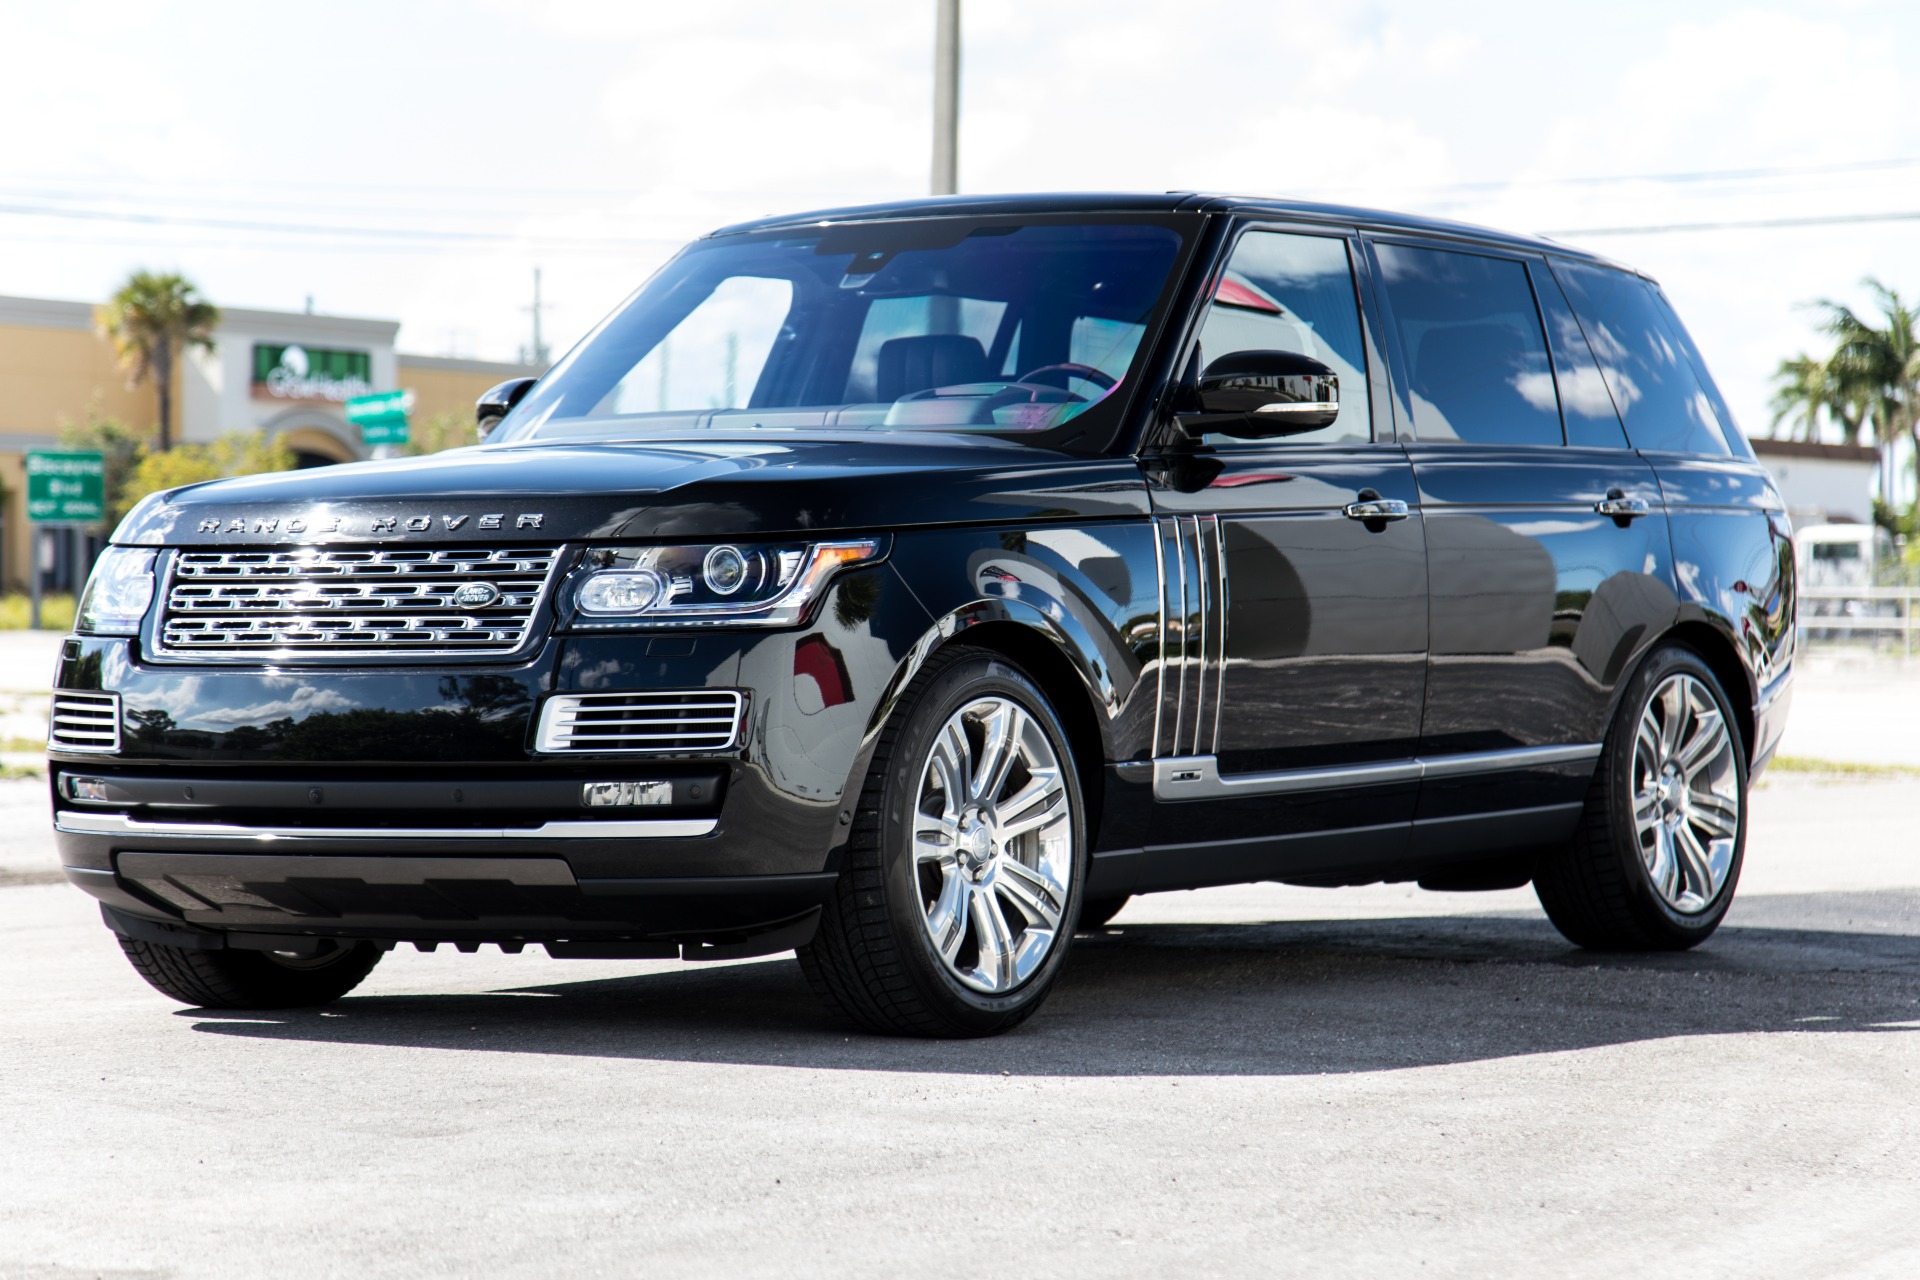 Used 2016 Land Rover Range Rover SVAutobiography LWB For